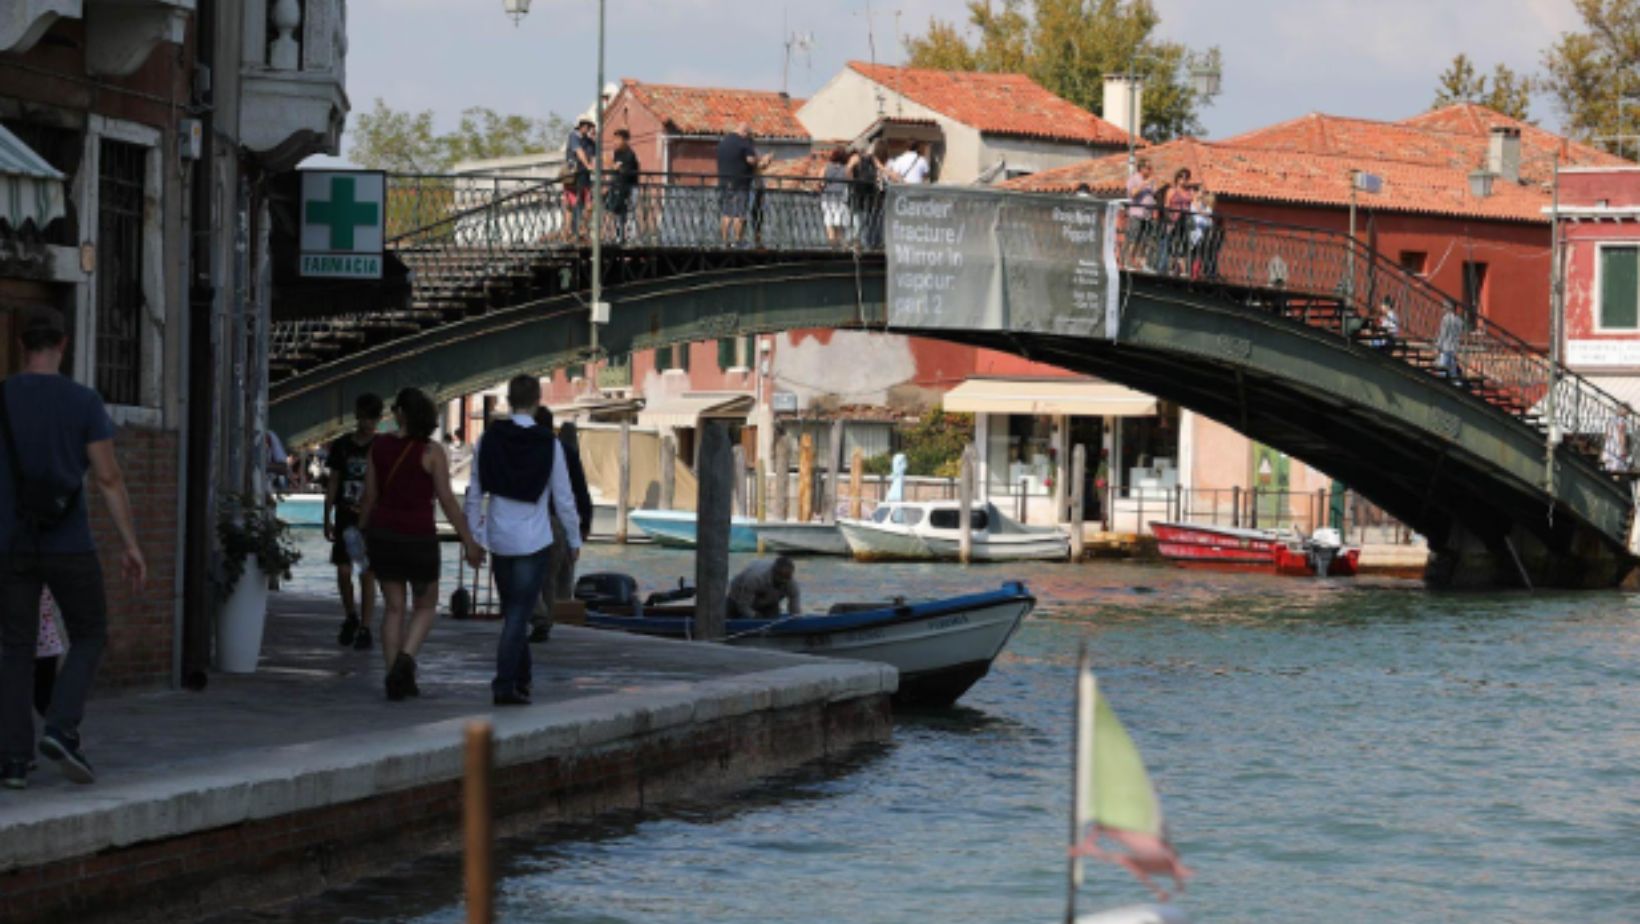 A view of a canal and bridge in Murano, Italy